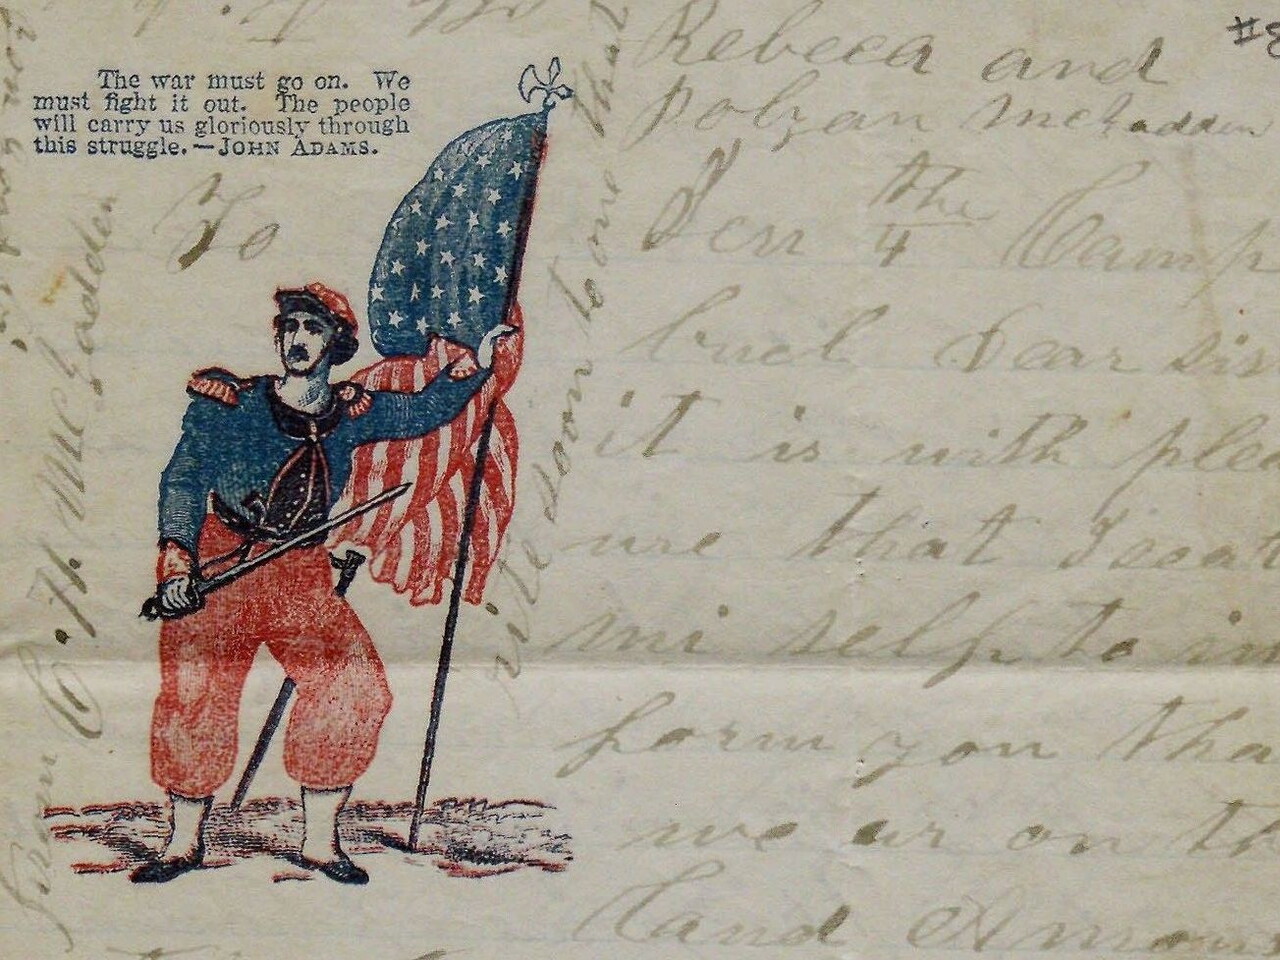 Letter with stamp of Union soldier holding the US flag